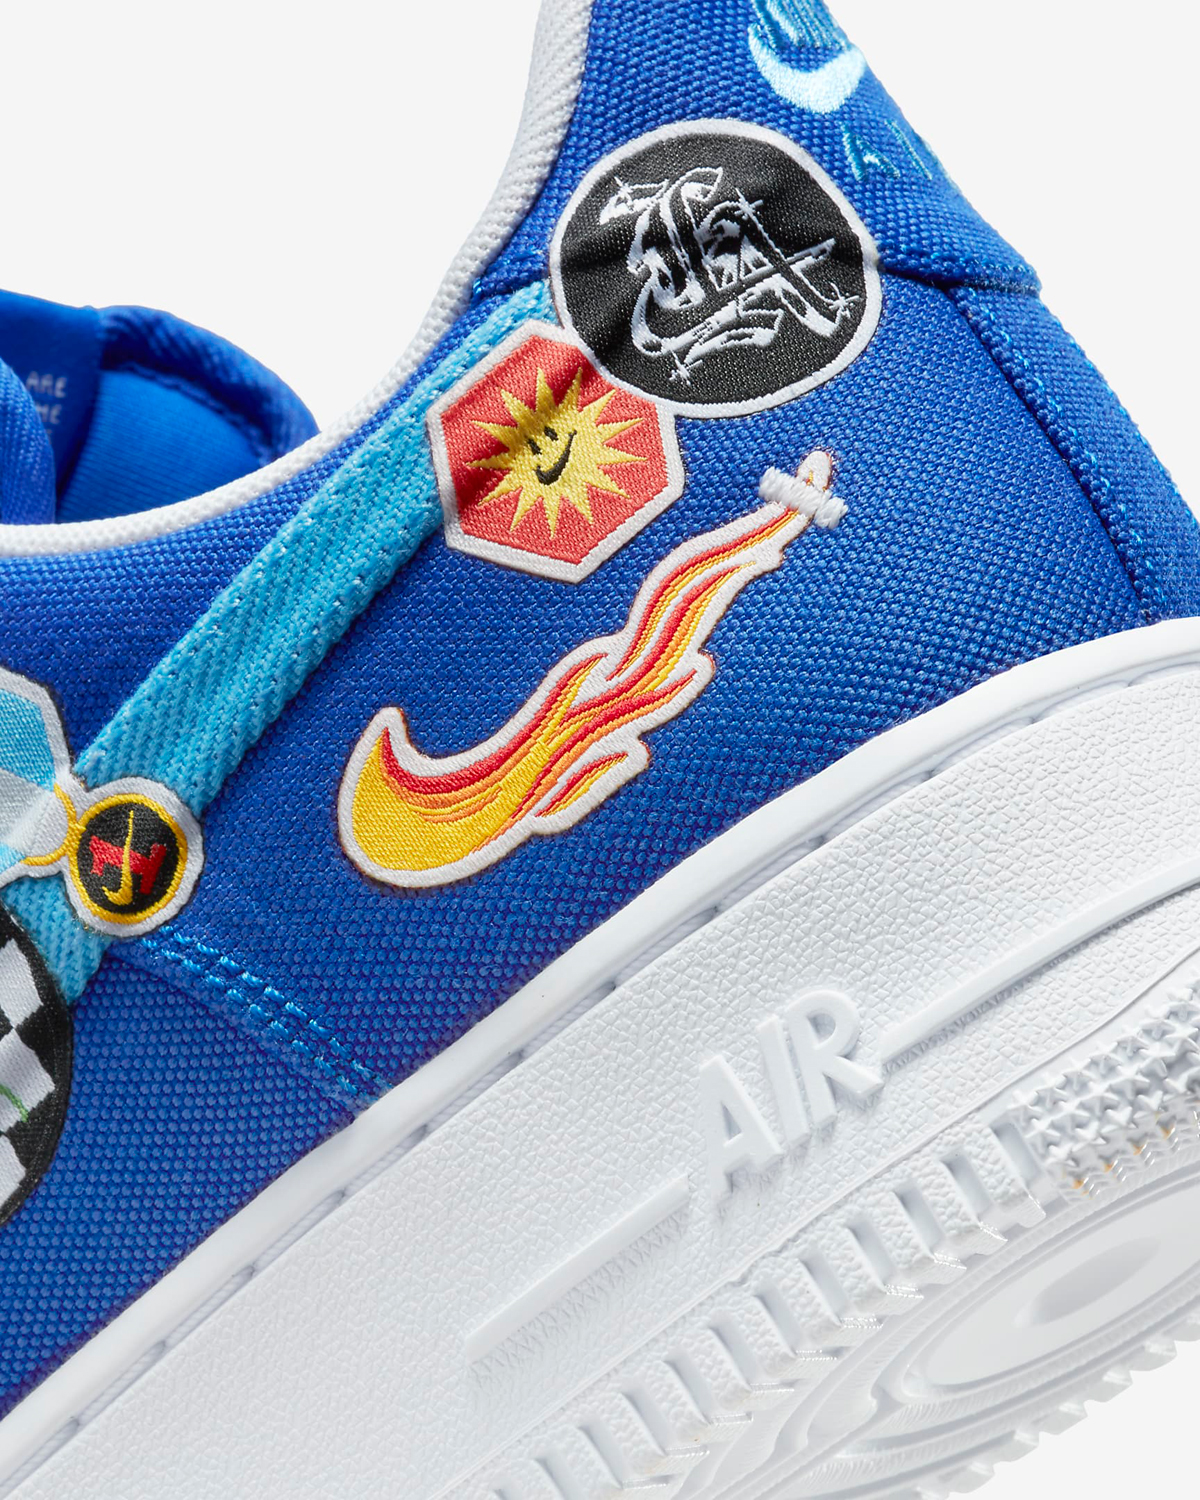 nike-air-force-1-low-los-angeles-patched-up-release-date-8